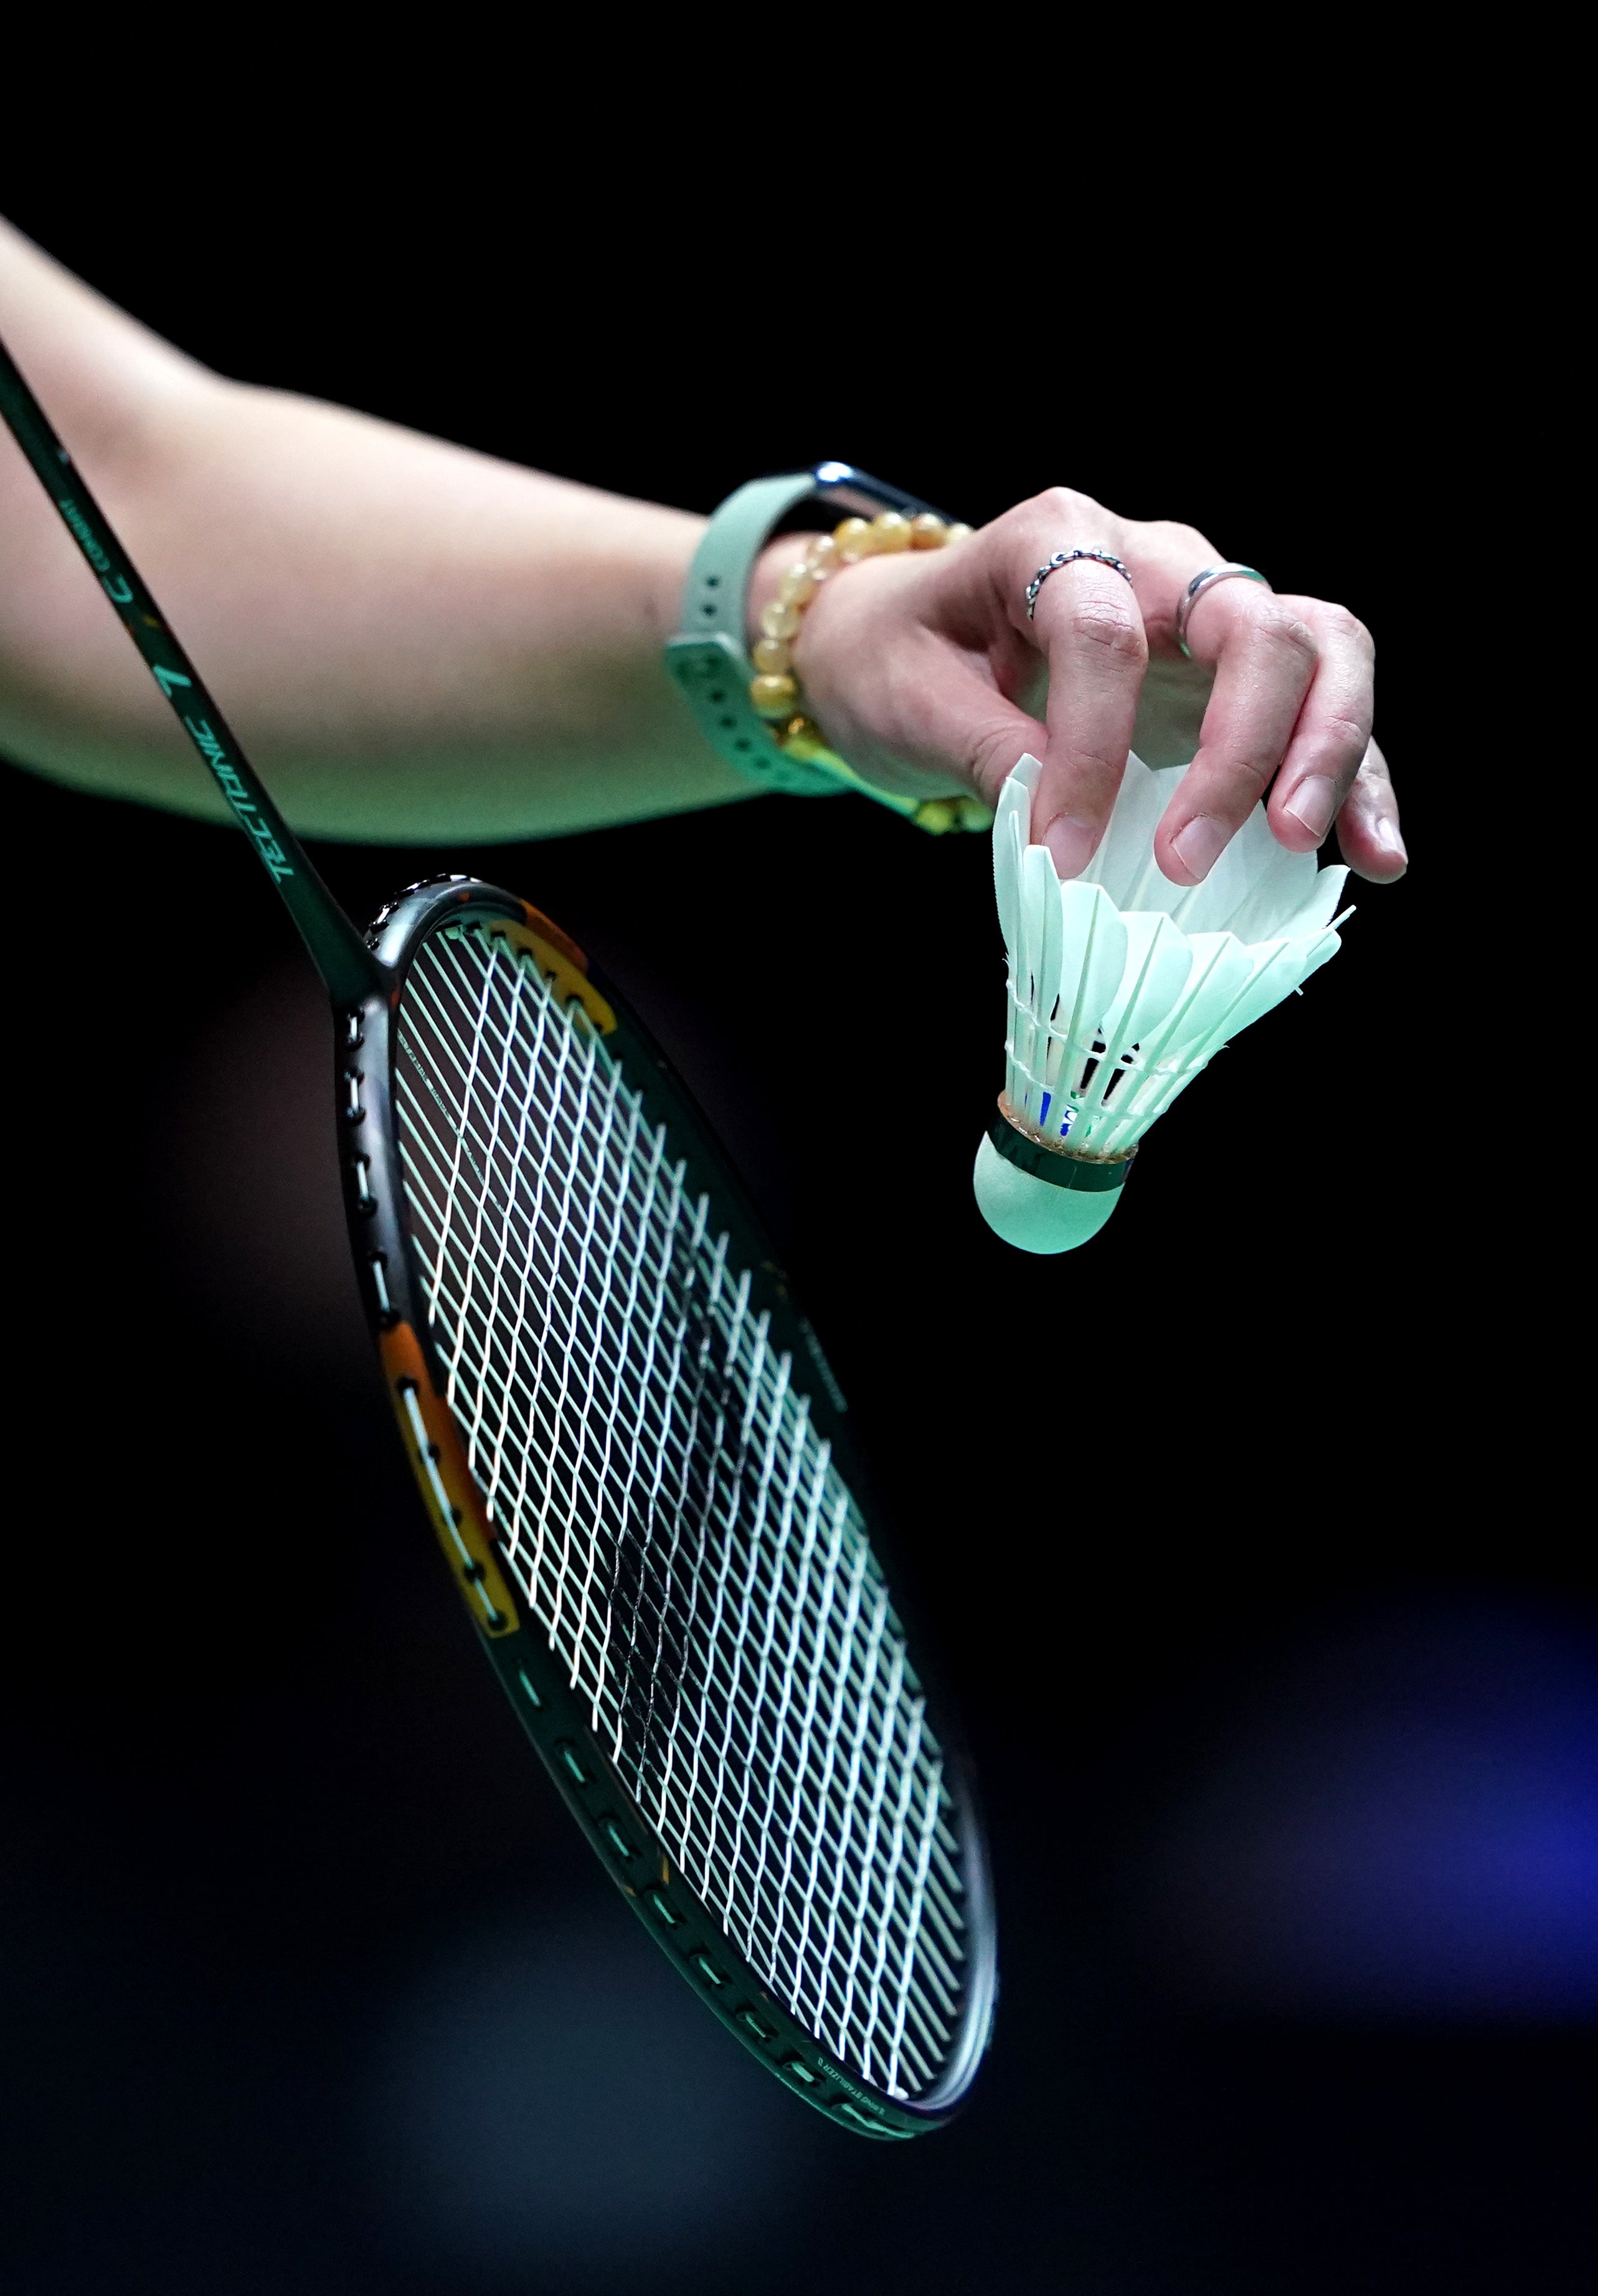 GB Badminton vows to look into allegations of a toxic environment in the sport The Independent